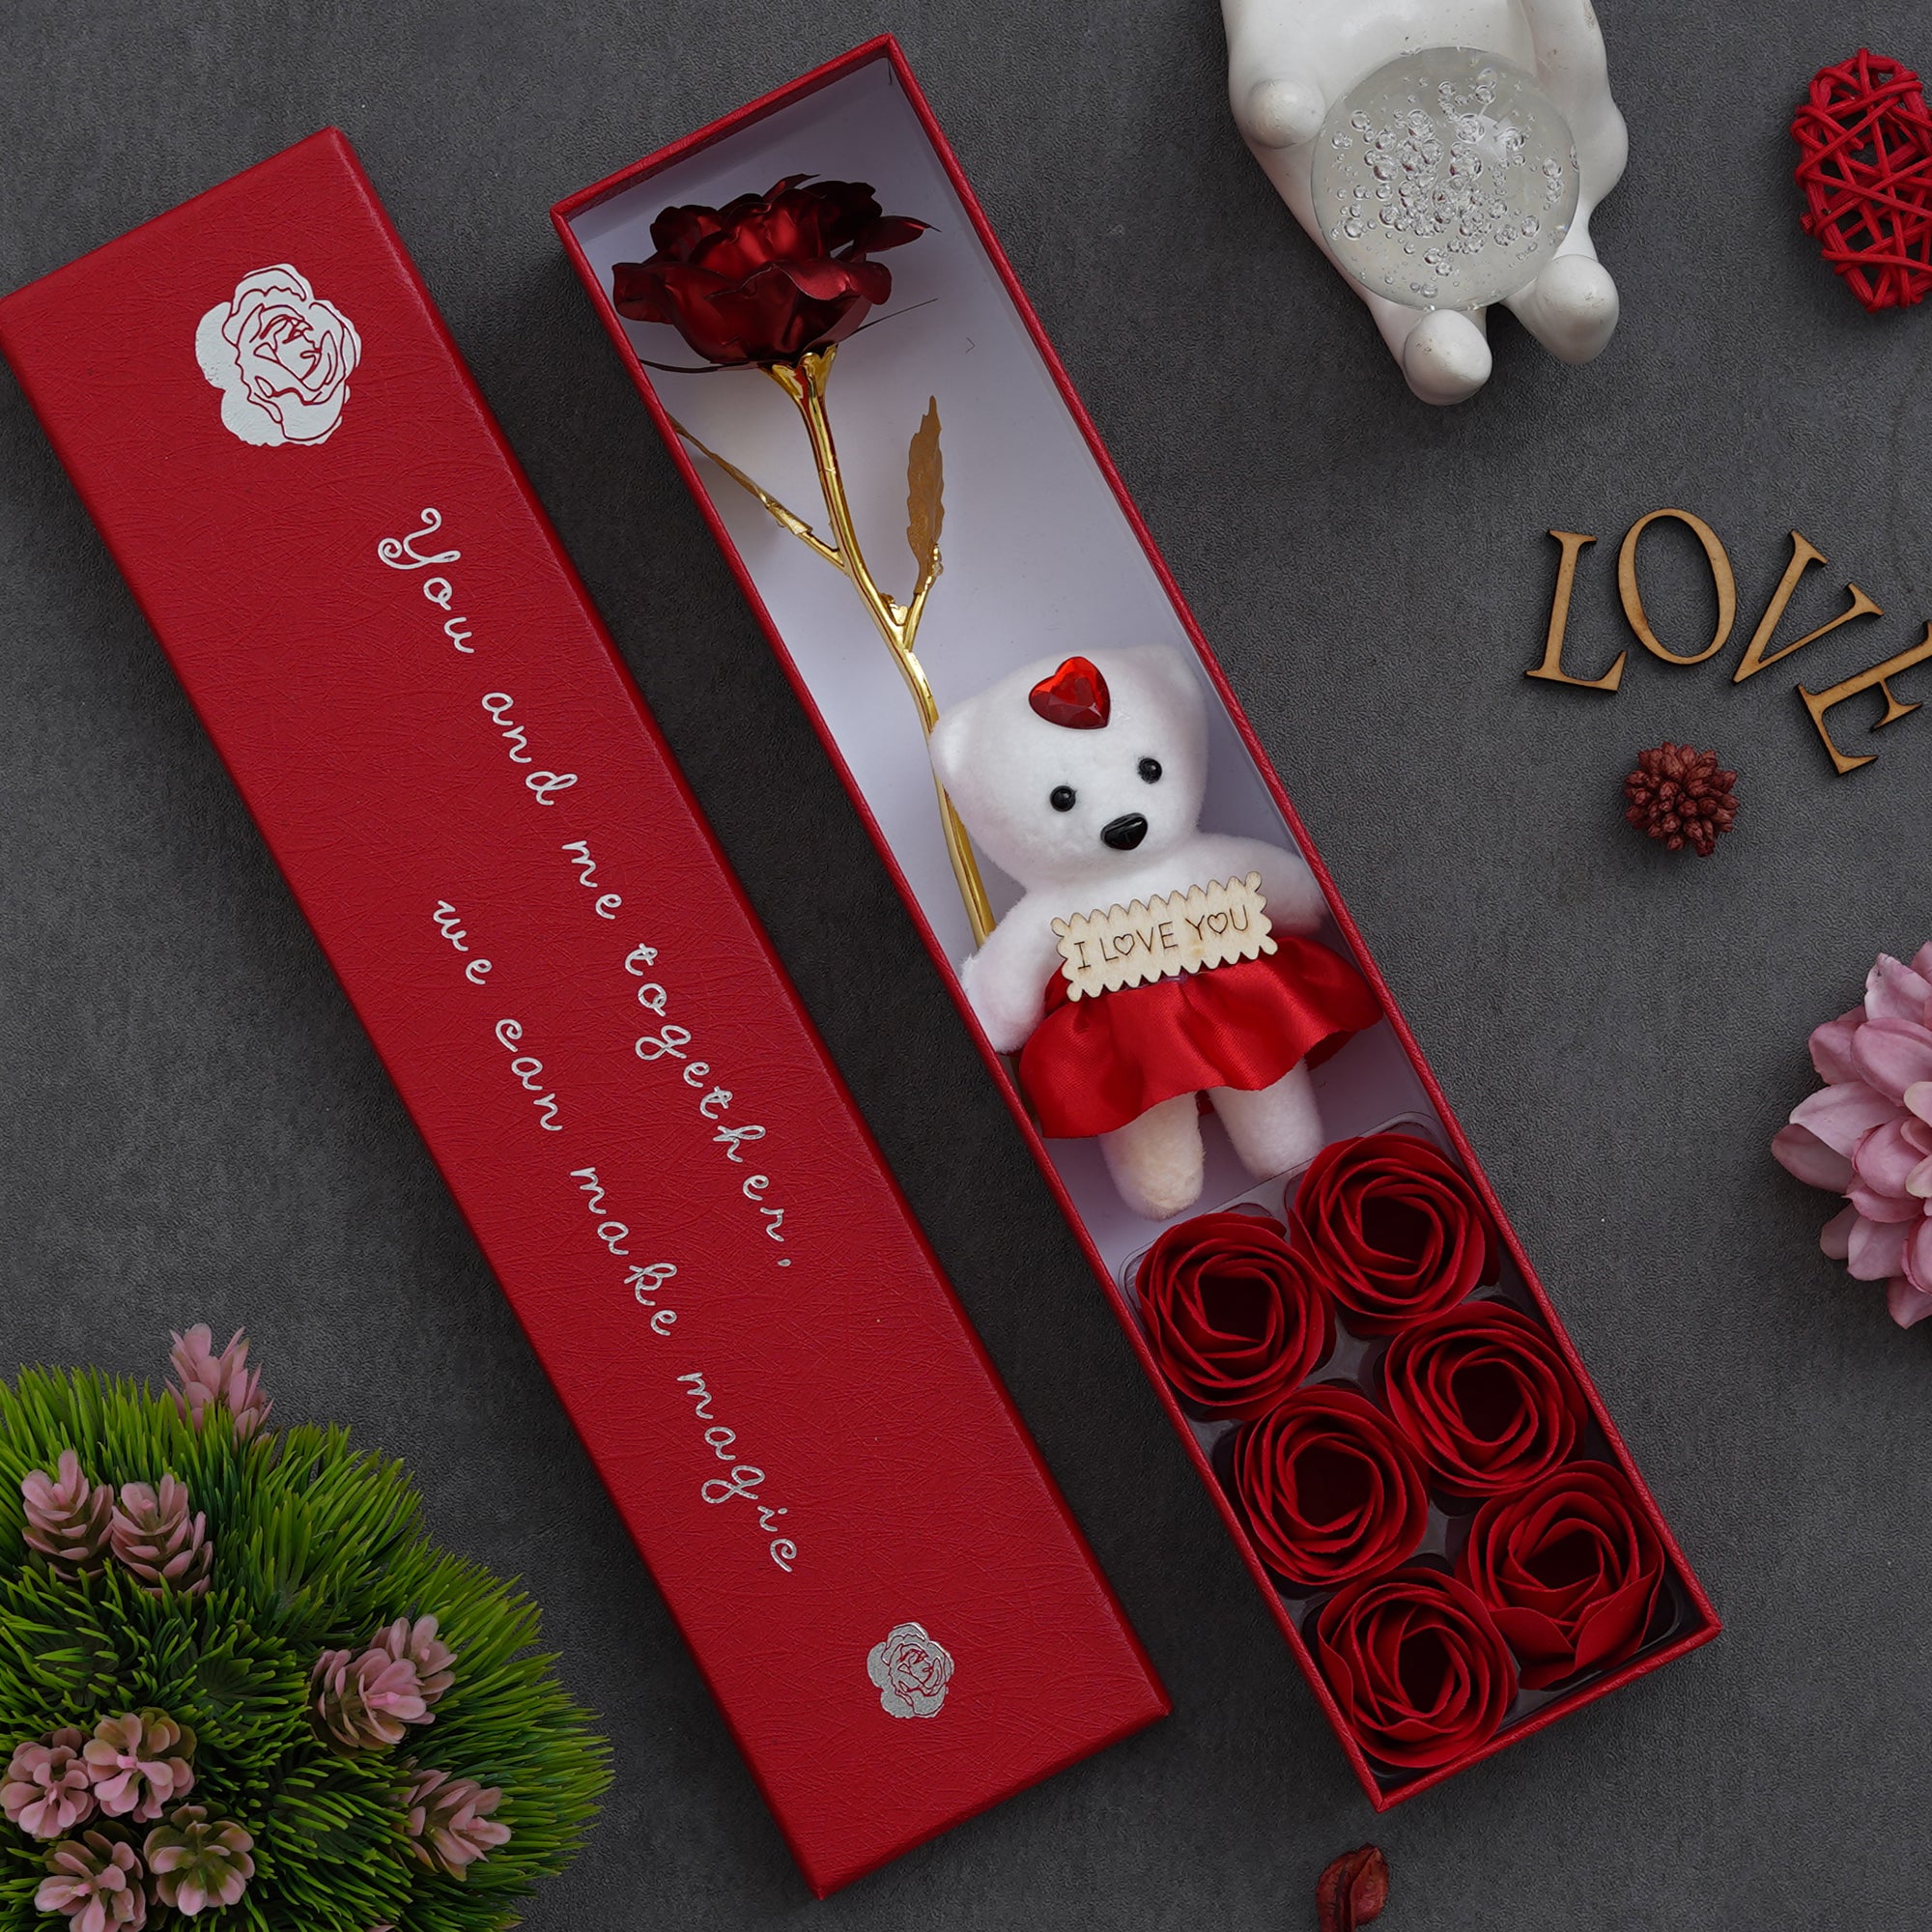 Valentine Combo of Set of 8 Love Post Cards Gift Cards Set, Red Gift Box with Teddy & Roses, "Things I Love About You" Puzzle Wooden Gift Set 3